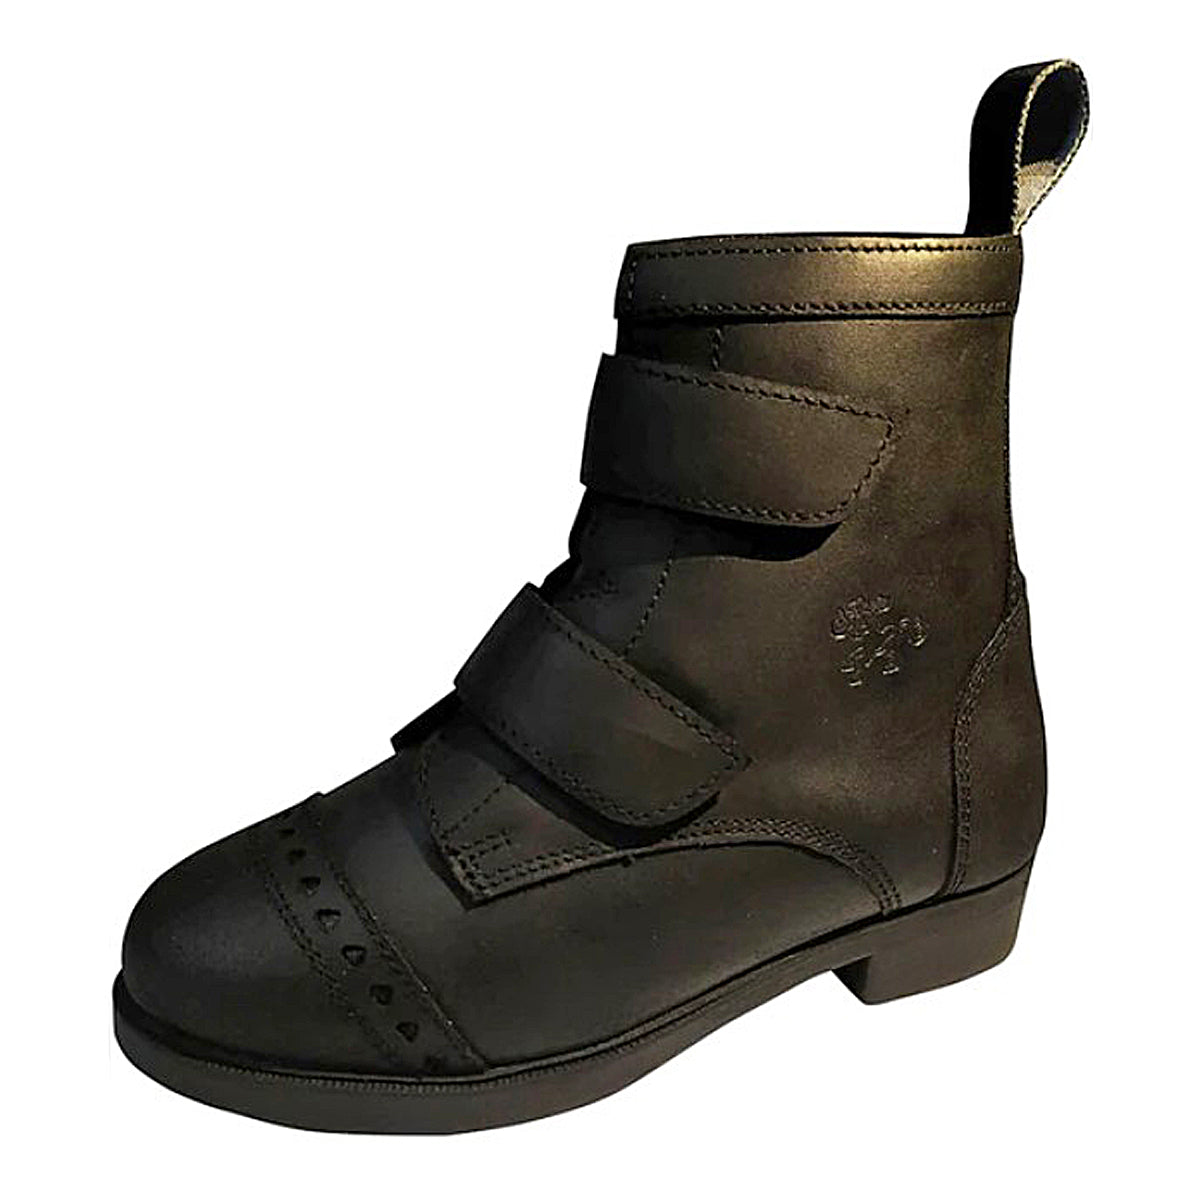 Belle and Bow Equestrian Velcro Paddock Boots